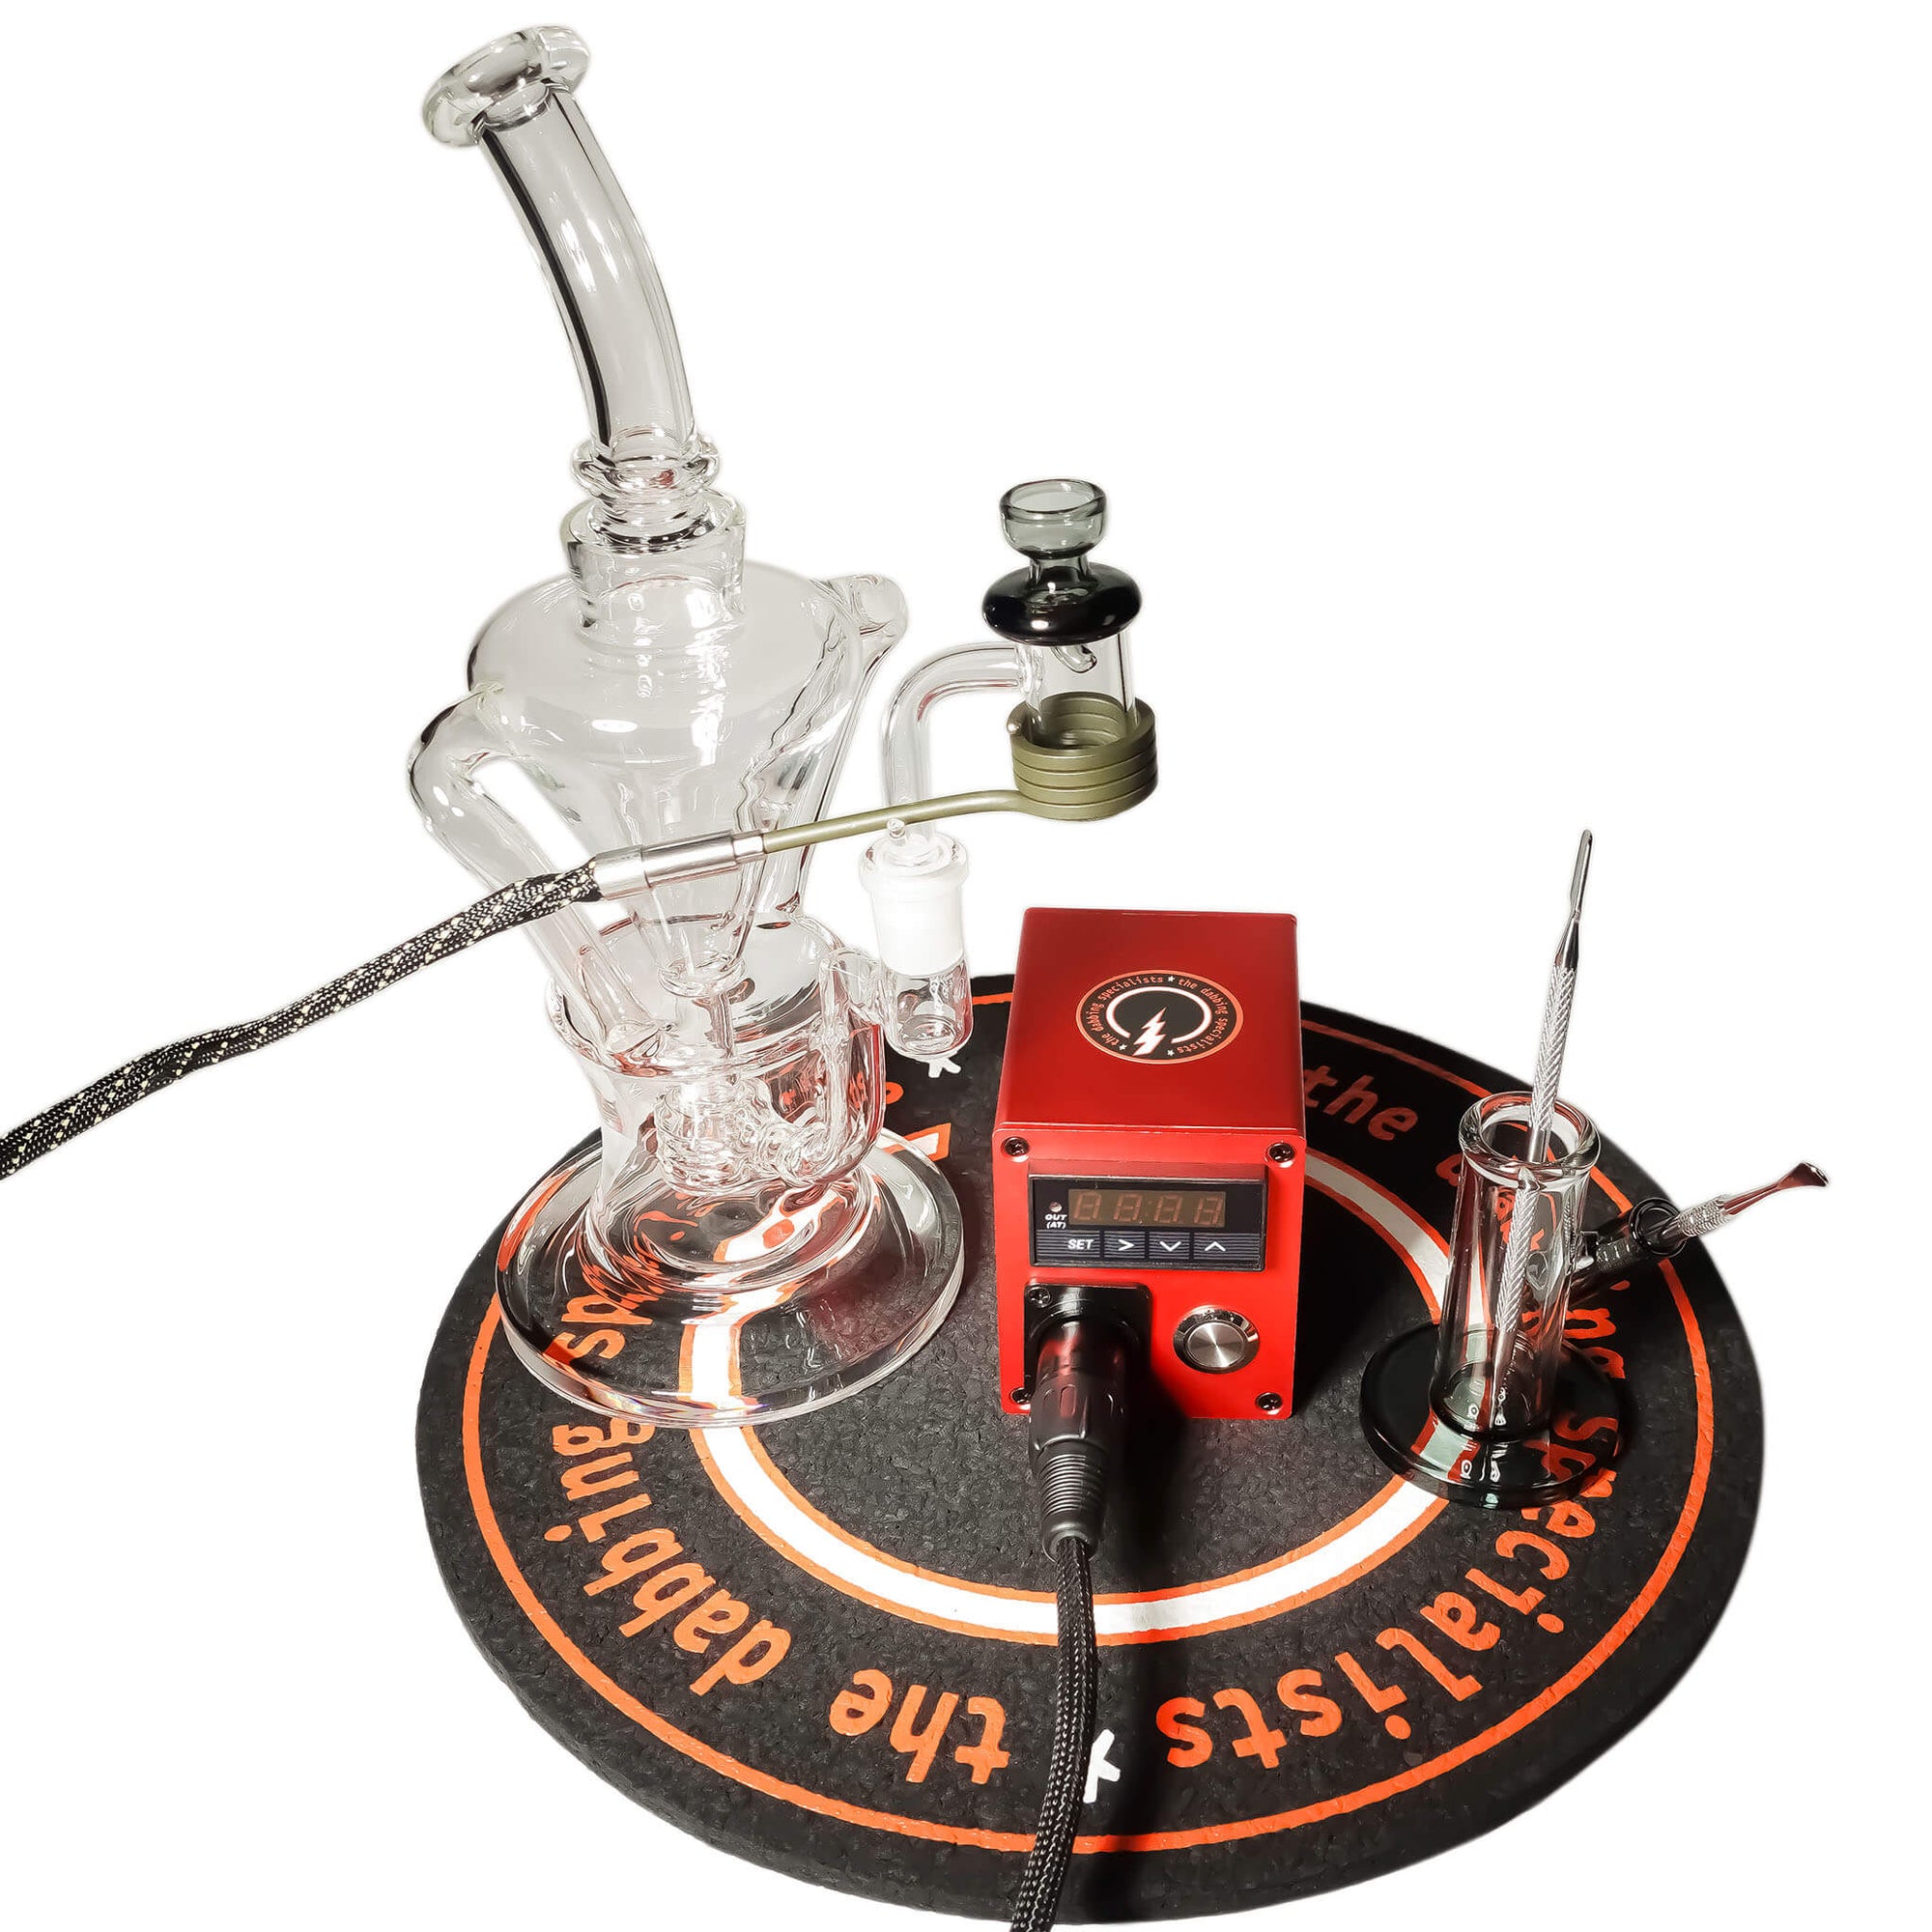 Futurus 20mm E-Banger Deluxe Enail Kit | Red Kit View | the dabbing specialists